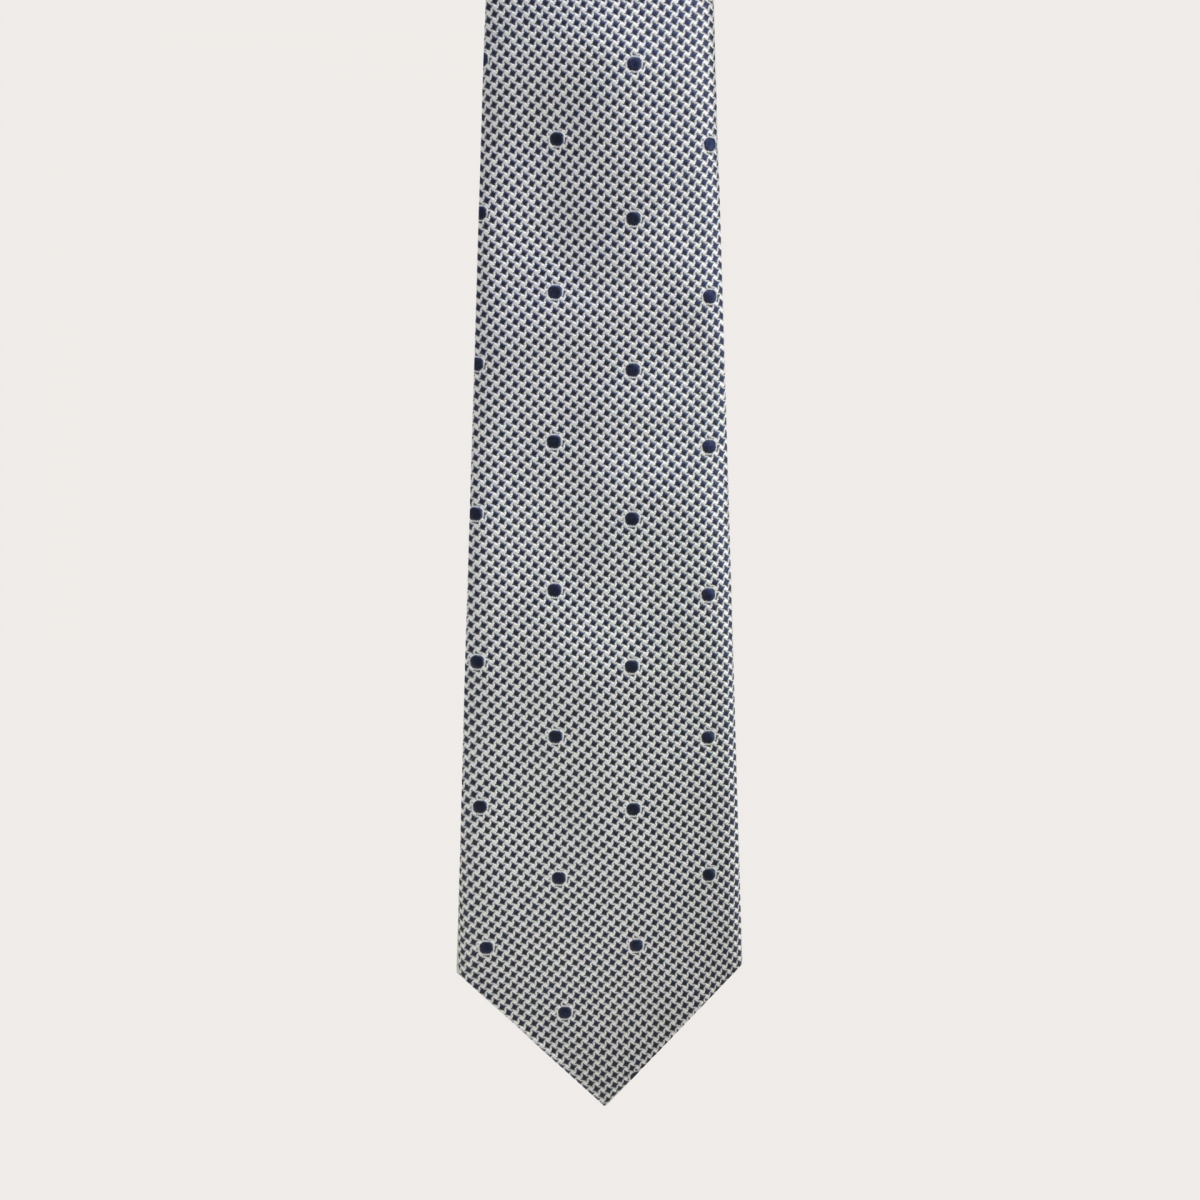 Jacquard silk tie, white and blue pattern